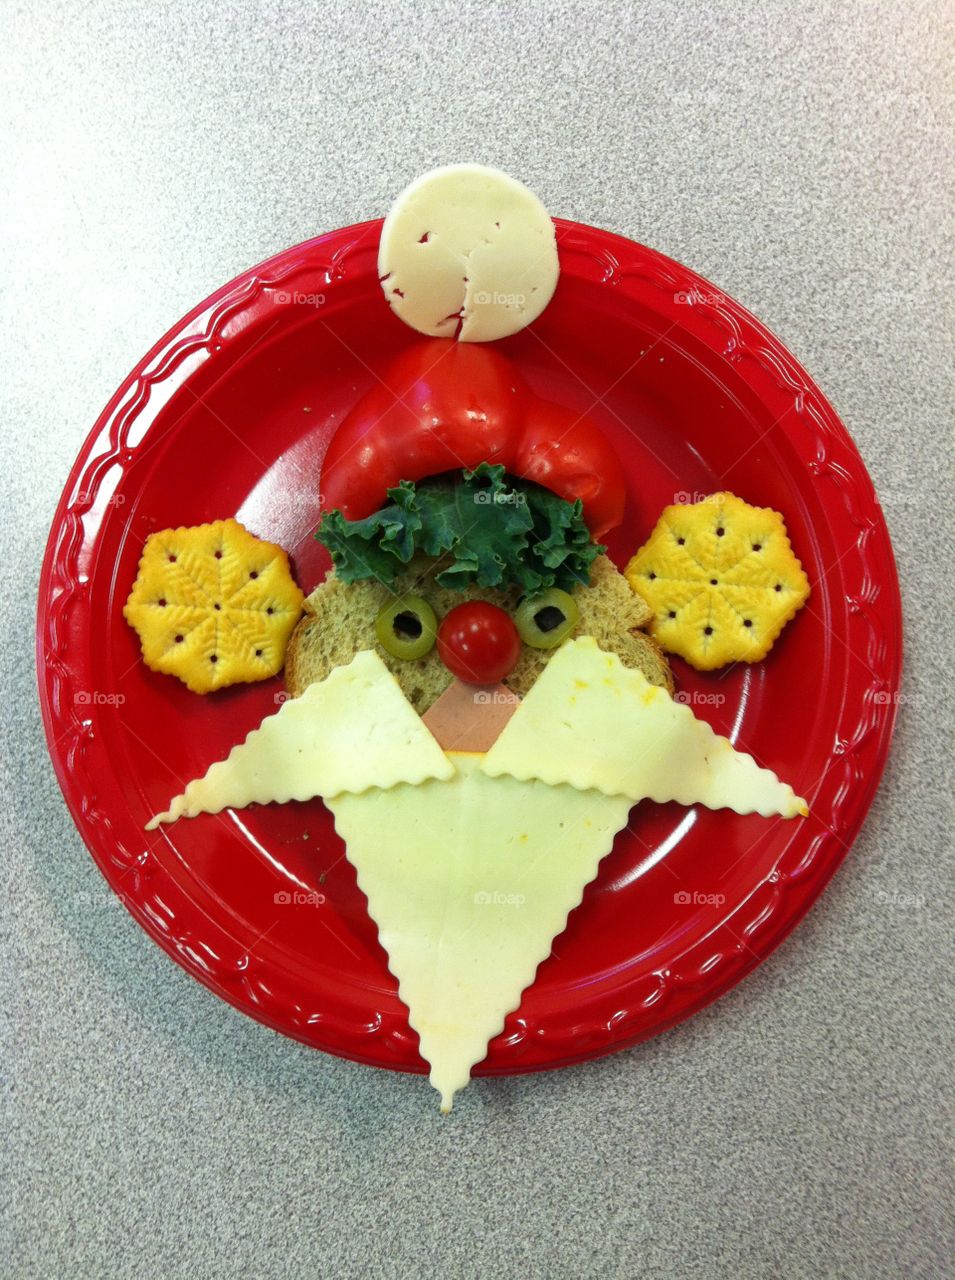 Santa Clause sandwich on a red plate. Bread, cheese, red bell pepper, crackers, green olives, cherry tomato, lettuce leaves. Healthy and yummy.